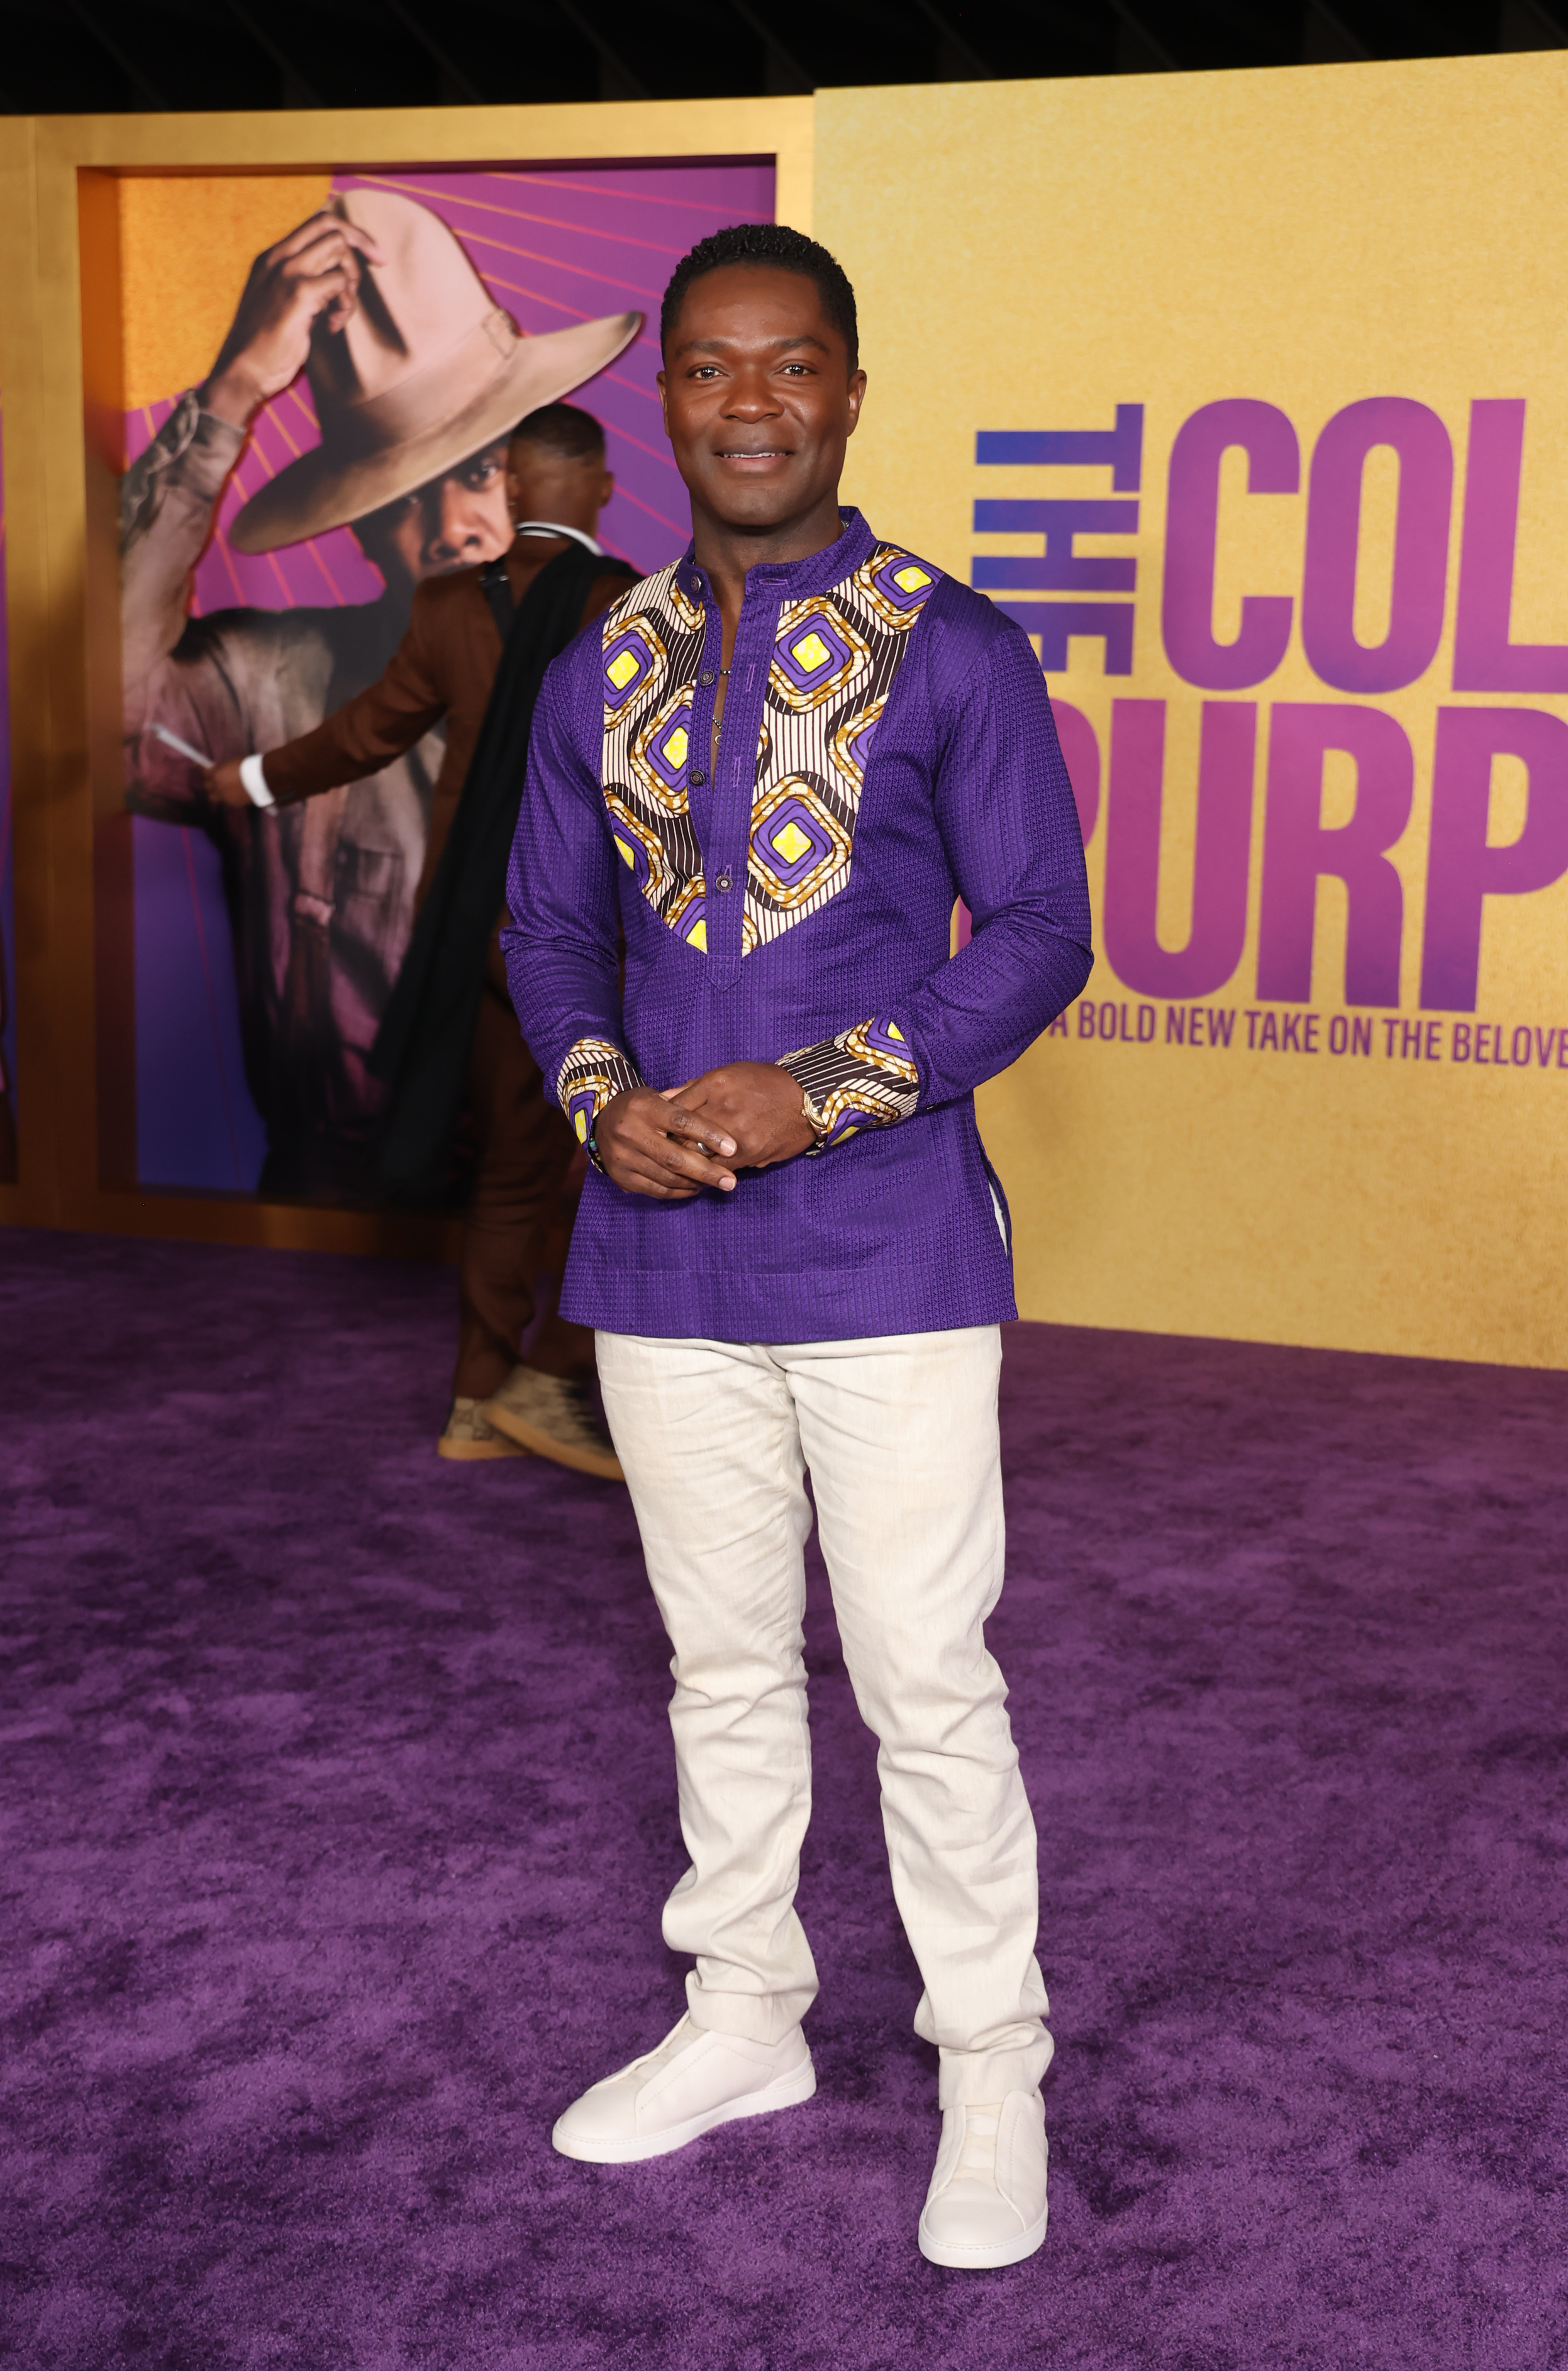 David in a long-sleeved purple print top and white pants